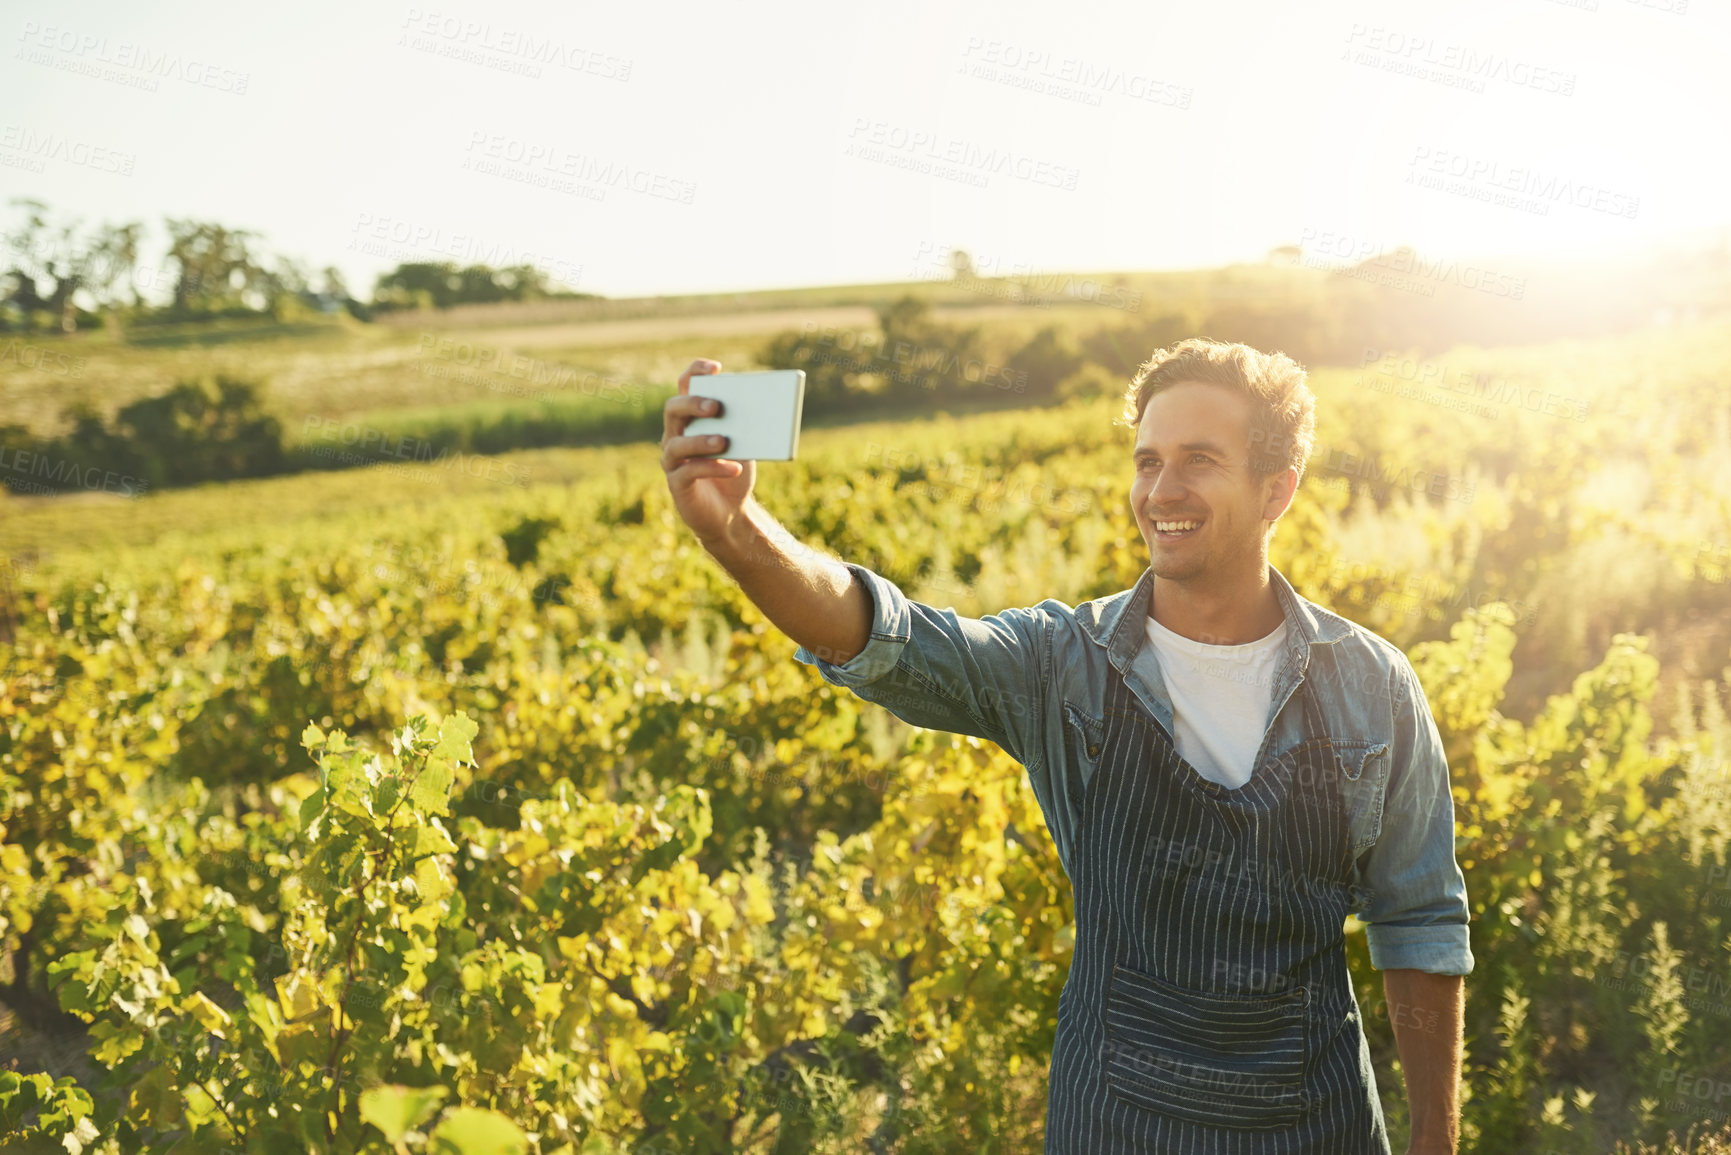 Buy stock photo Shot of a young man taking a selfie with his cellphone while working on a farm